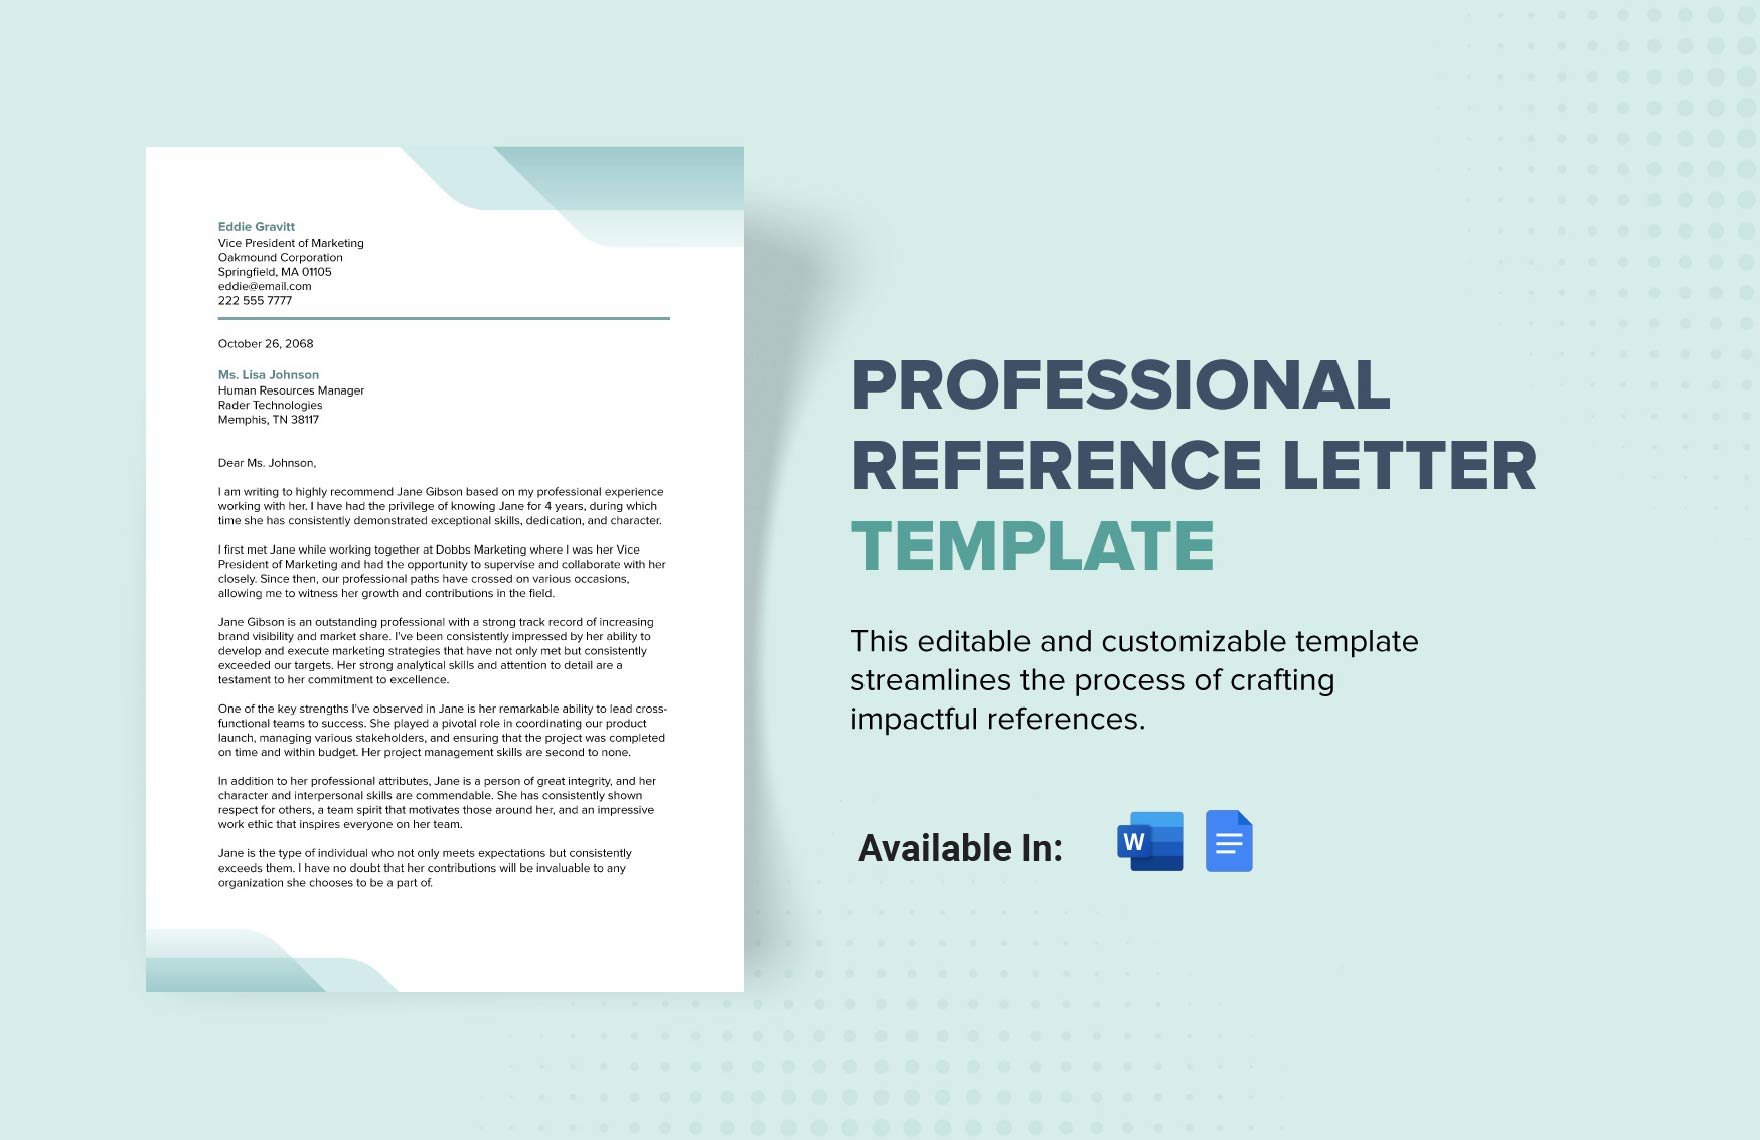 Professional Reference Letter Template in Word, Google Docs